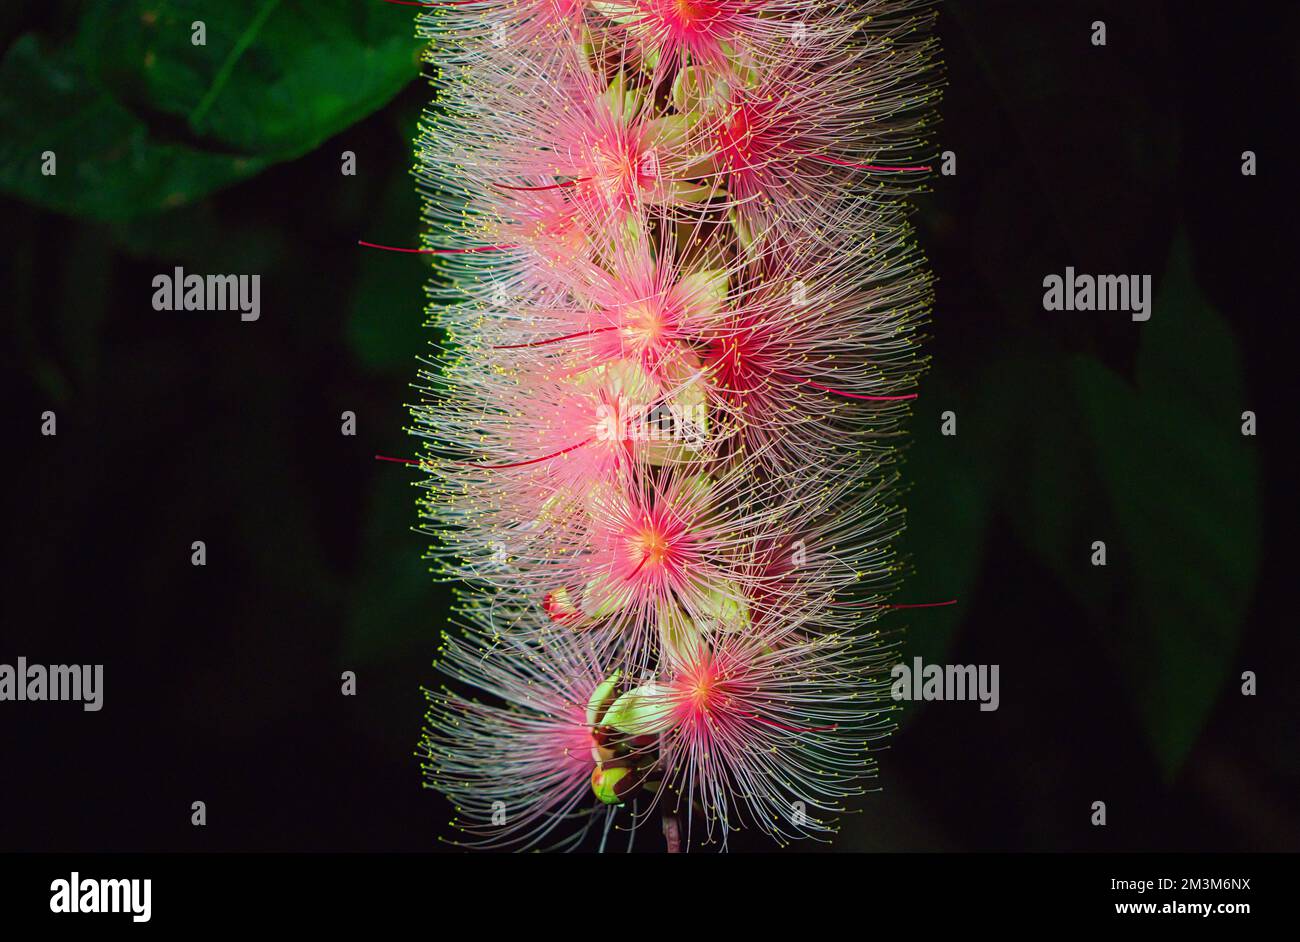 Barringtonia racemosa or powder puff tree flower at night. Pink exotic flowers. Strings of flowers hang from the trees like fireworks. Yilan, Taiwan. Stock Photo